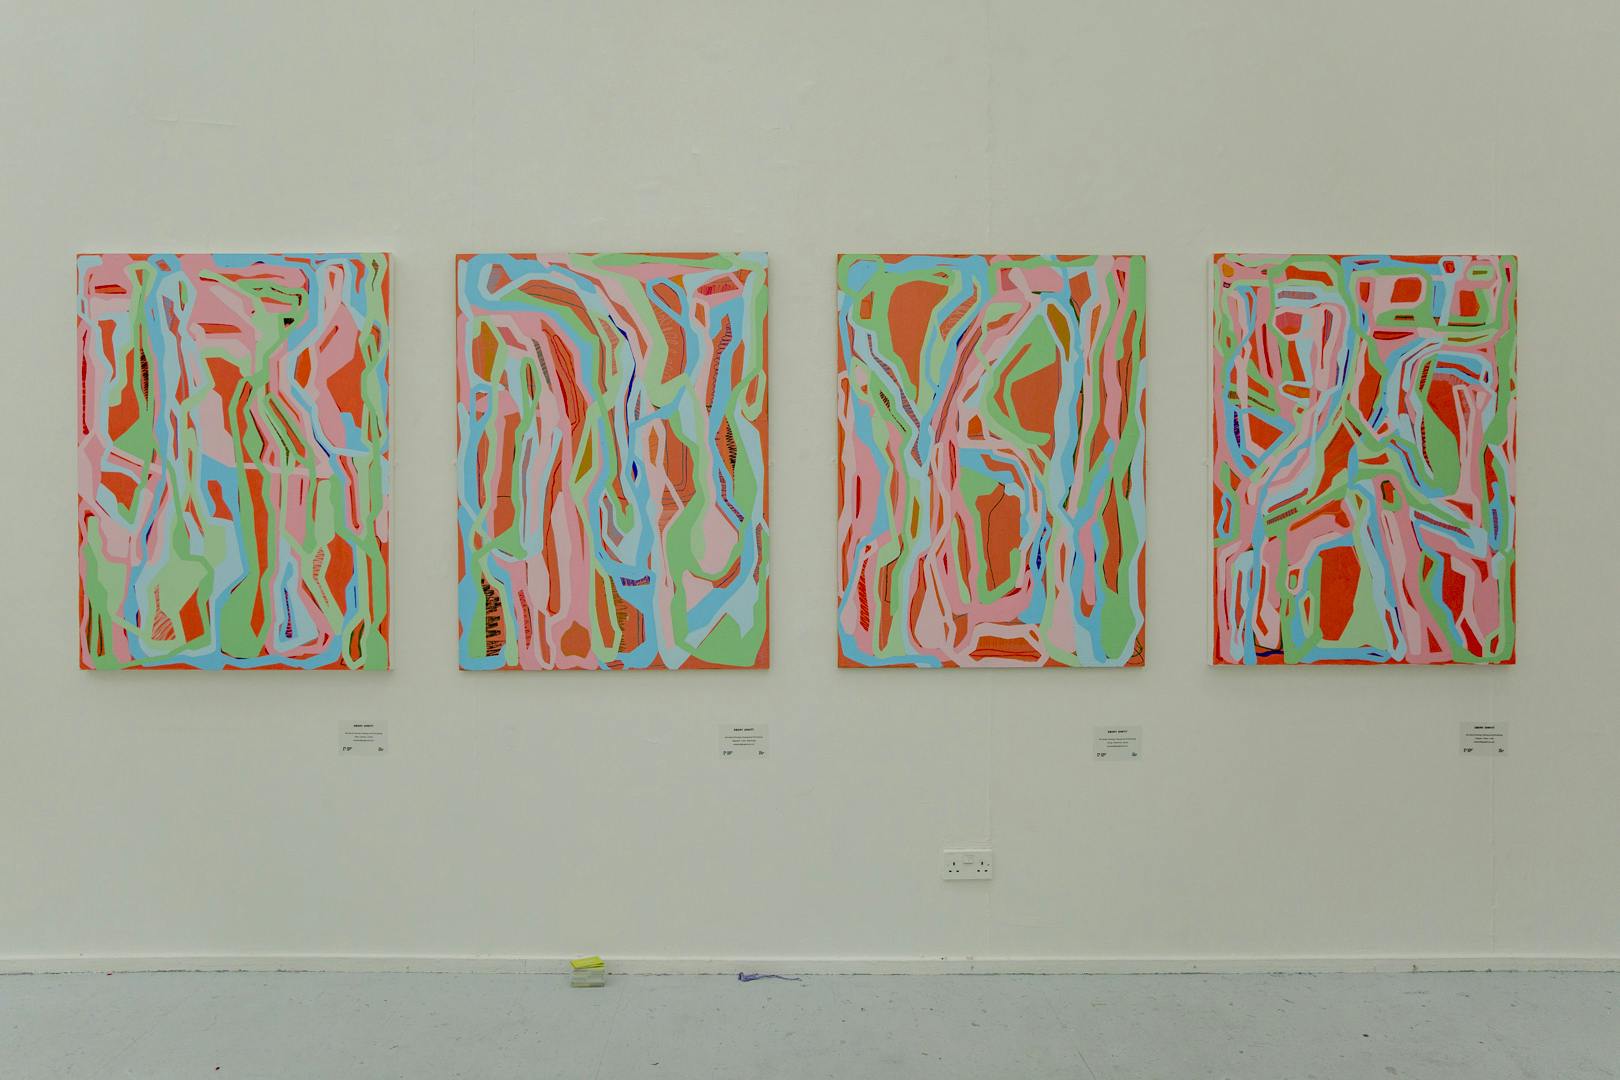 Image shows Ebony's four paintings in situ in the exhibition, featuring bright colourful patterns against a white neutral background